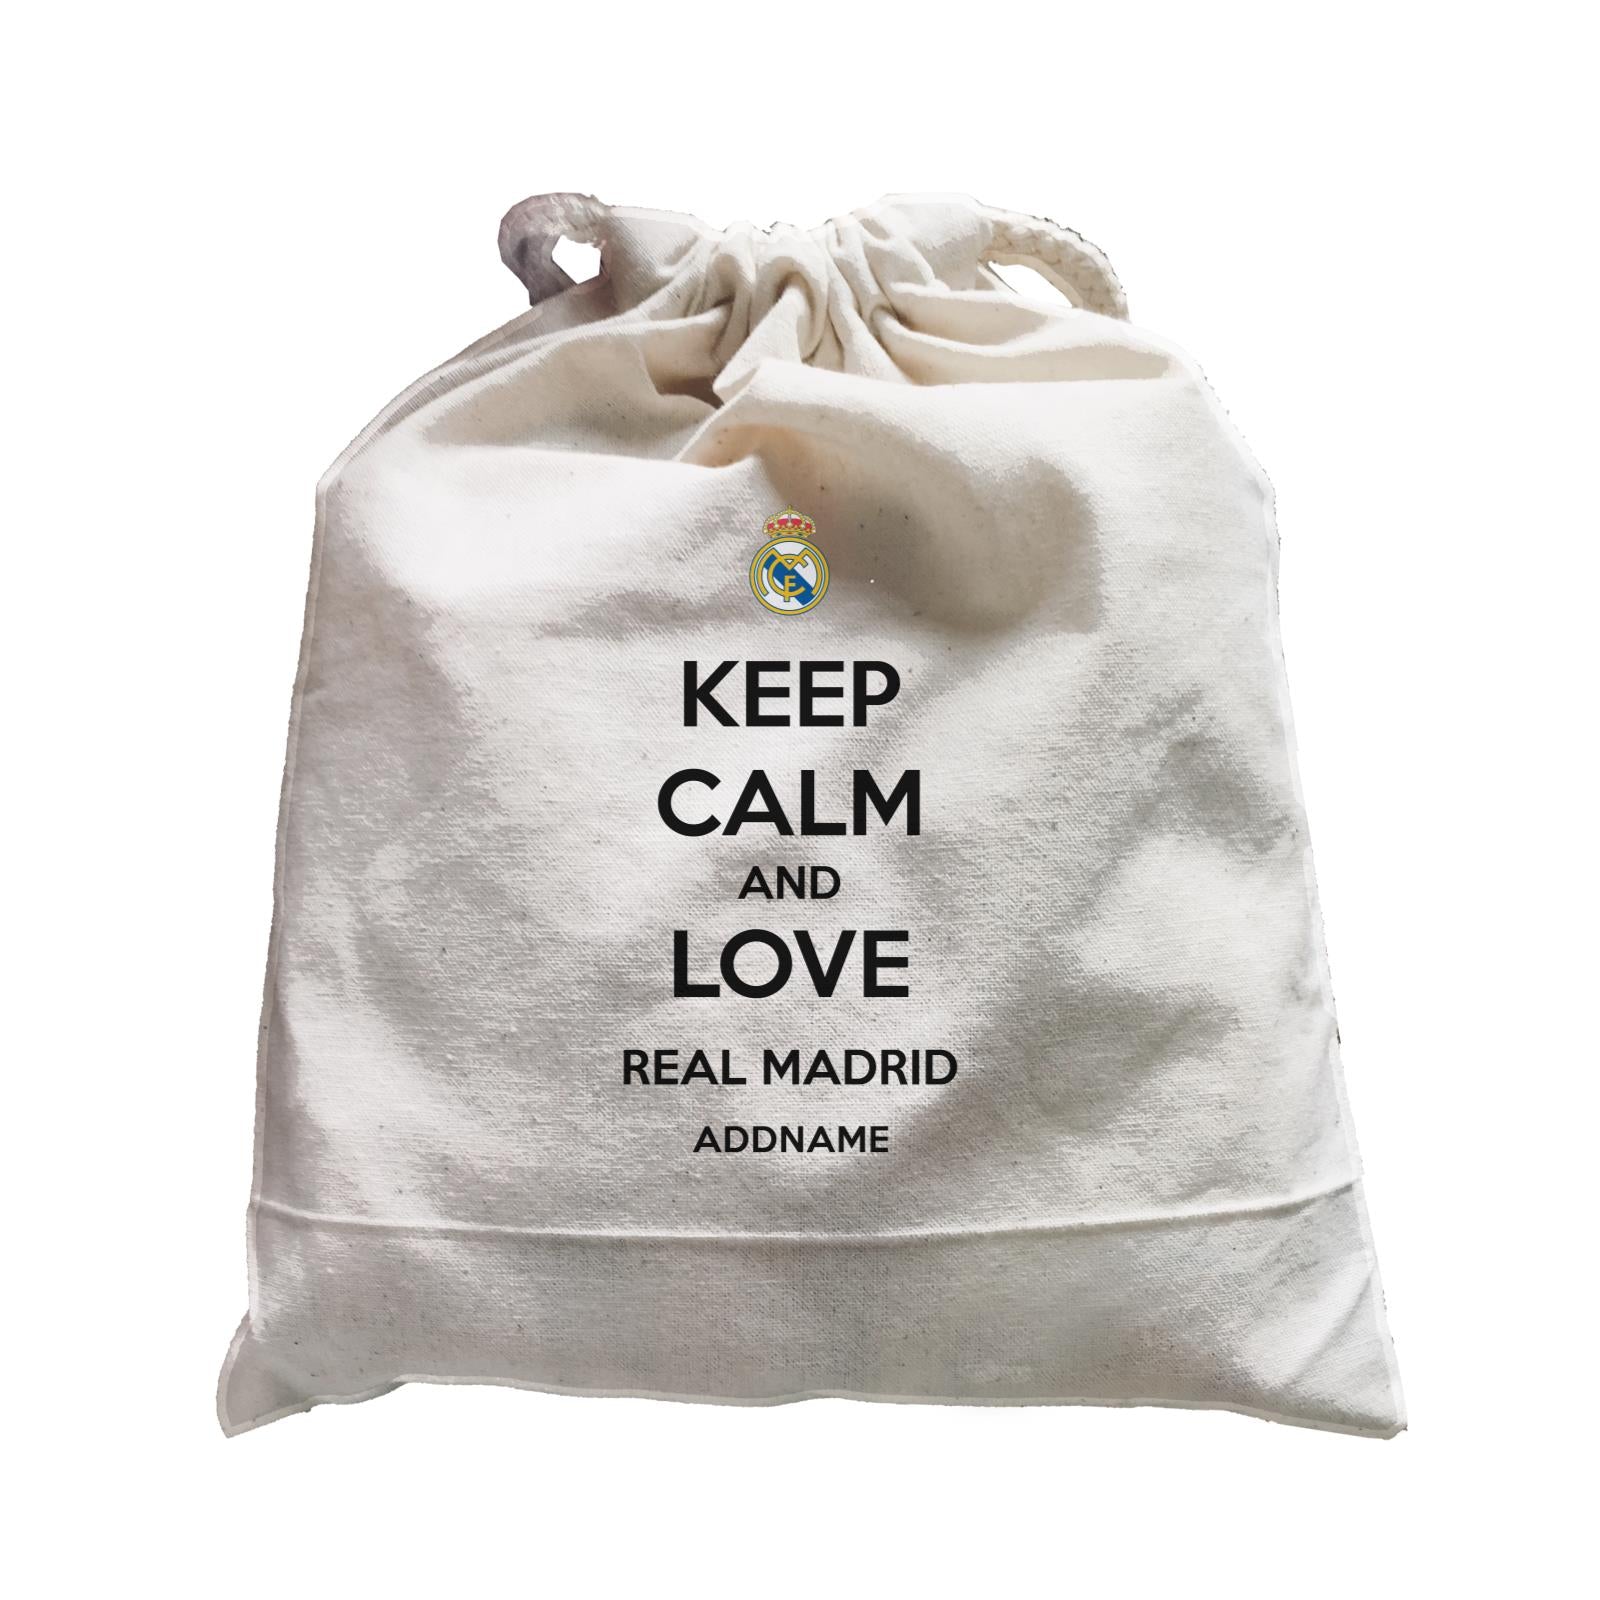 Real Madrid Football Keep Calm And Love Series Addname Satchel